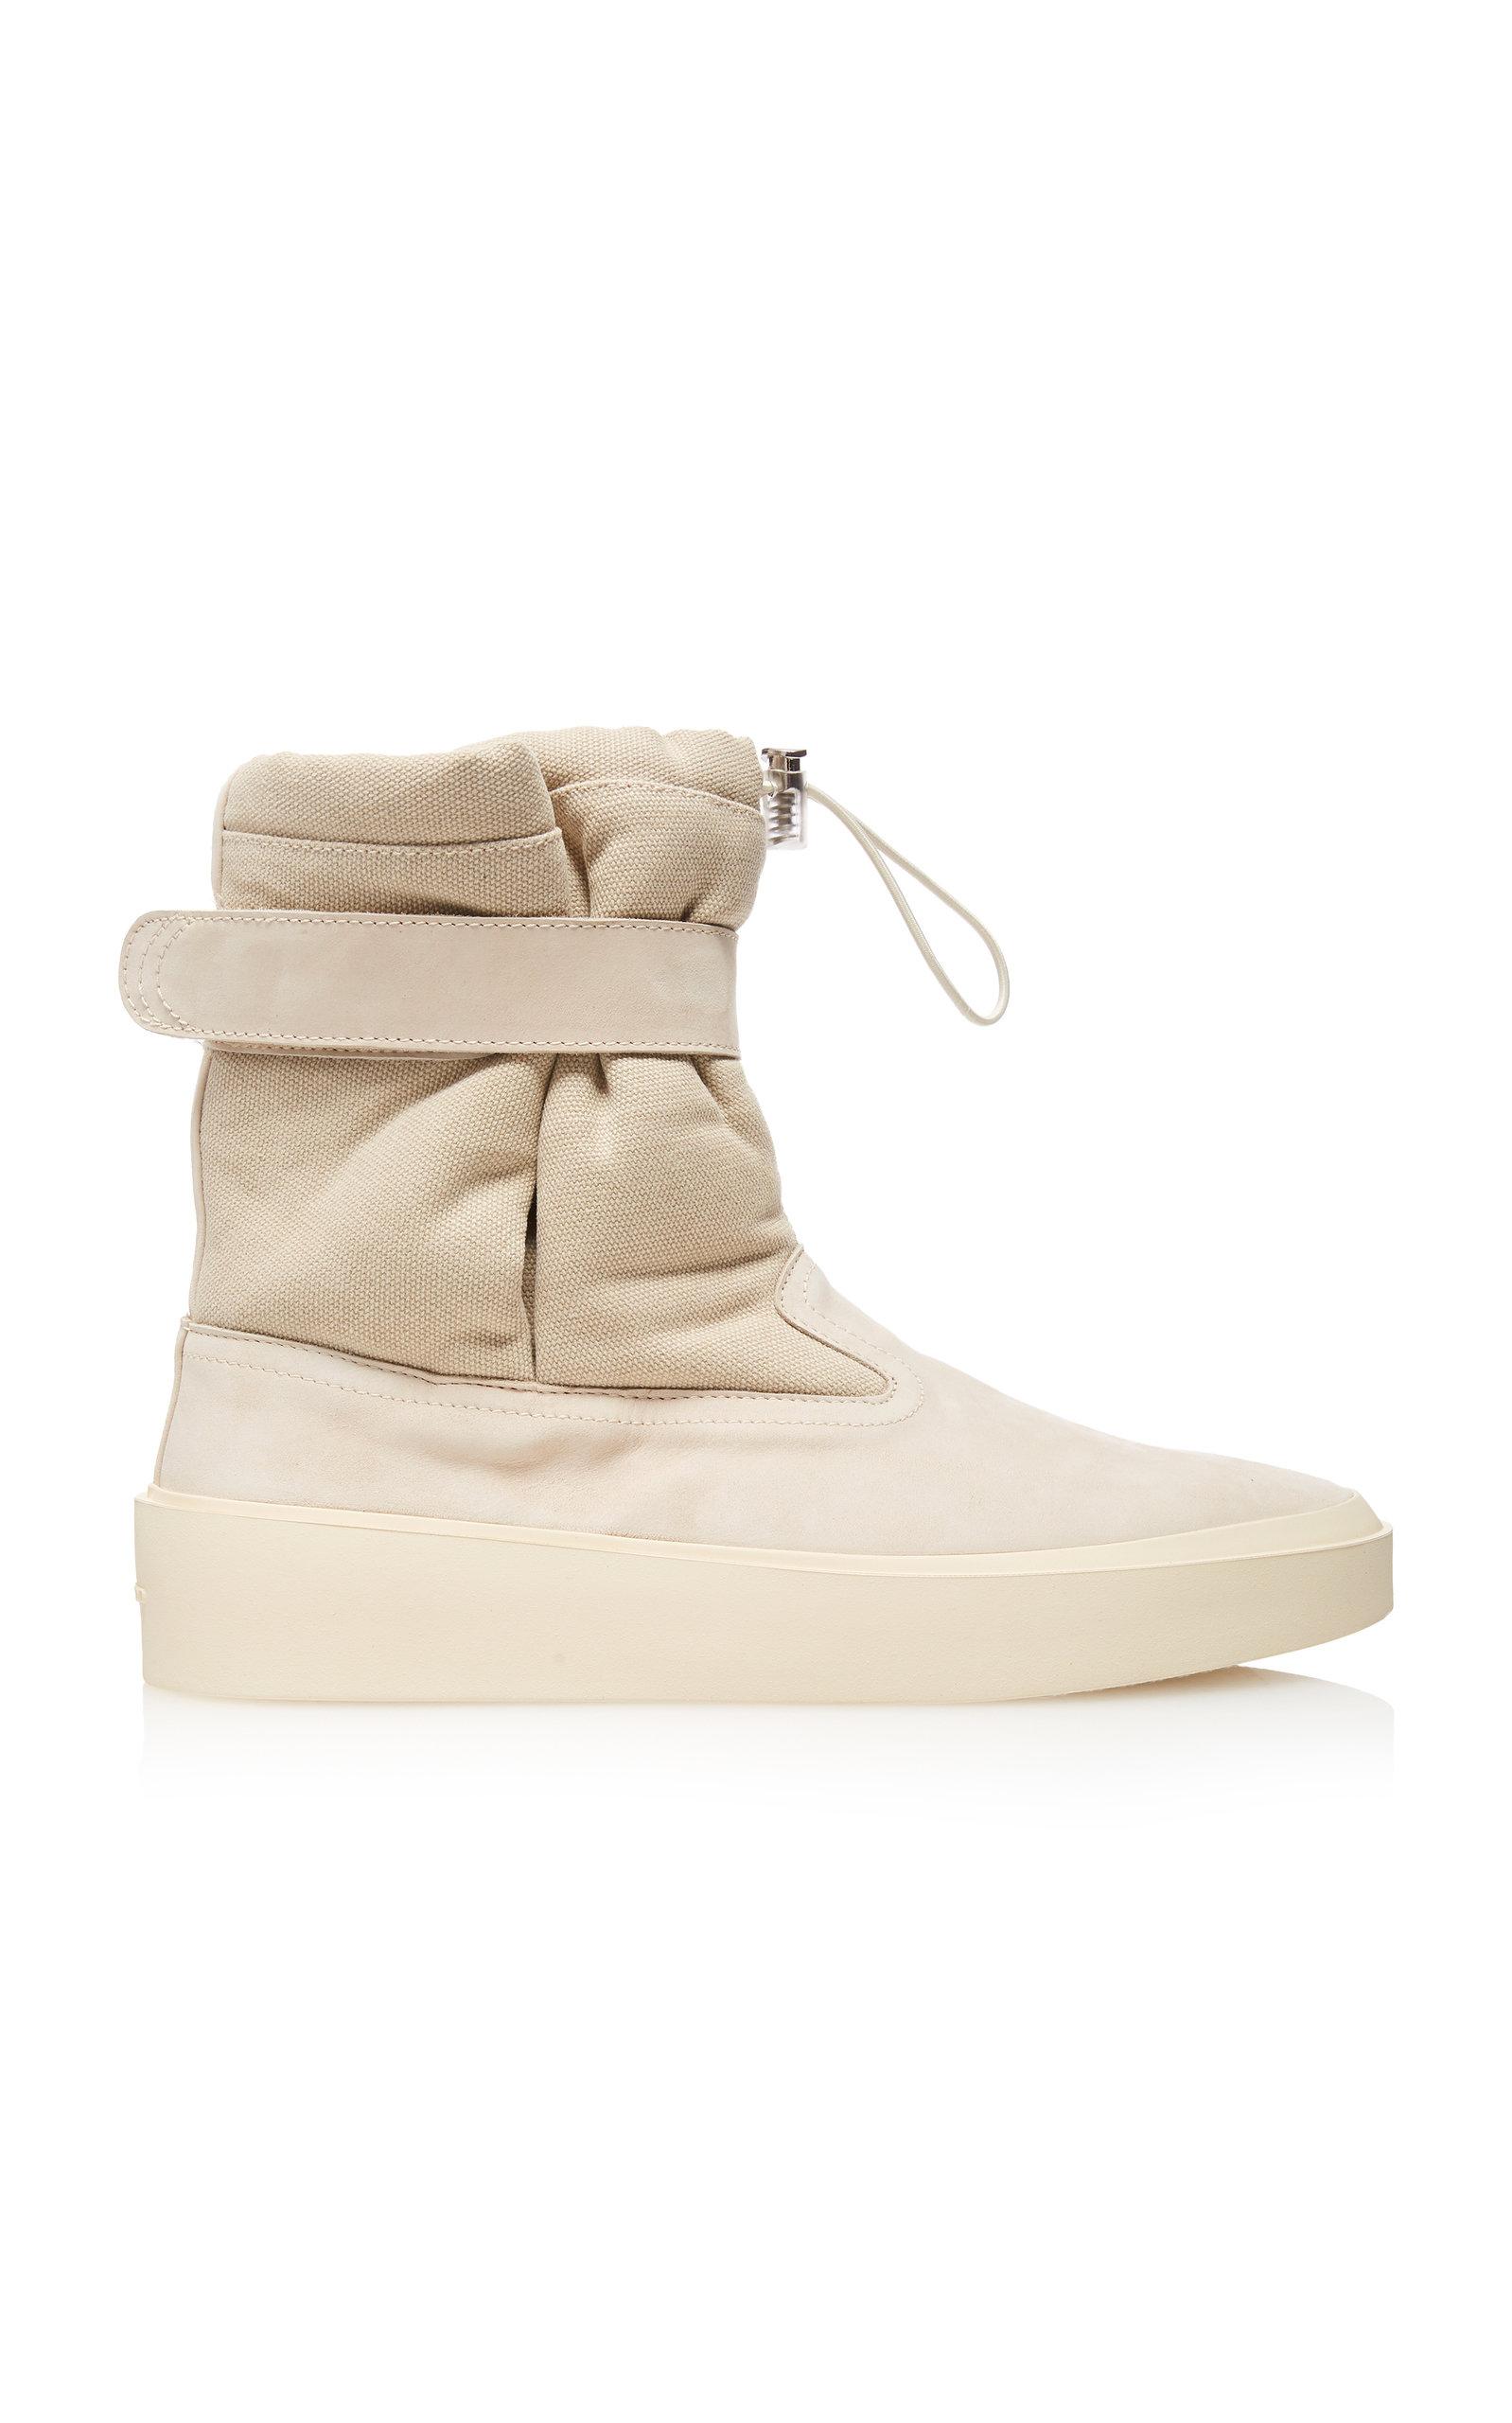 Fear Of God Canvas Ski Lounge Boot in Bone (Natural) for Men - Save 44% ...